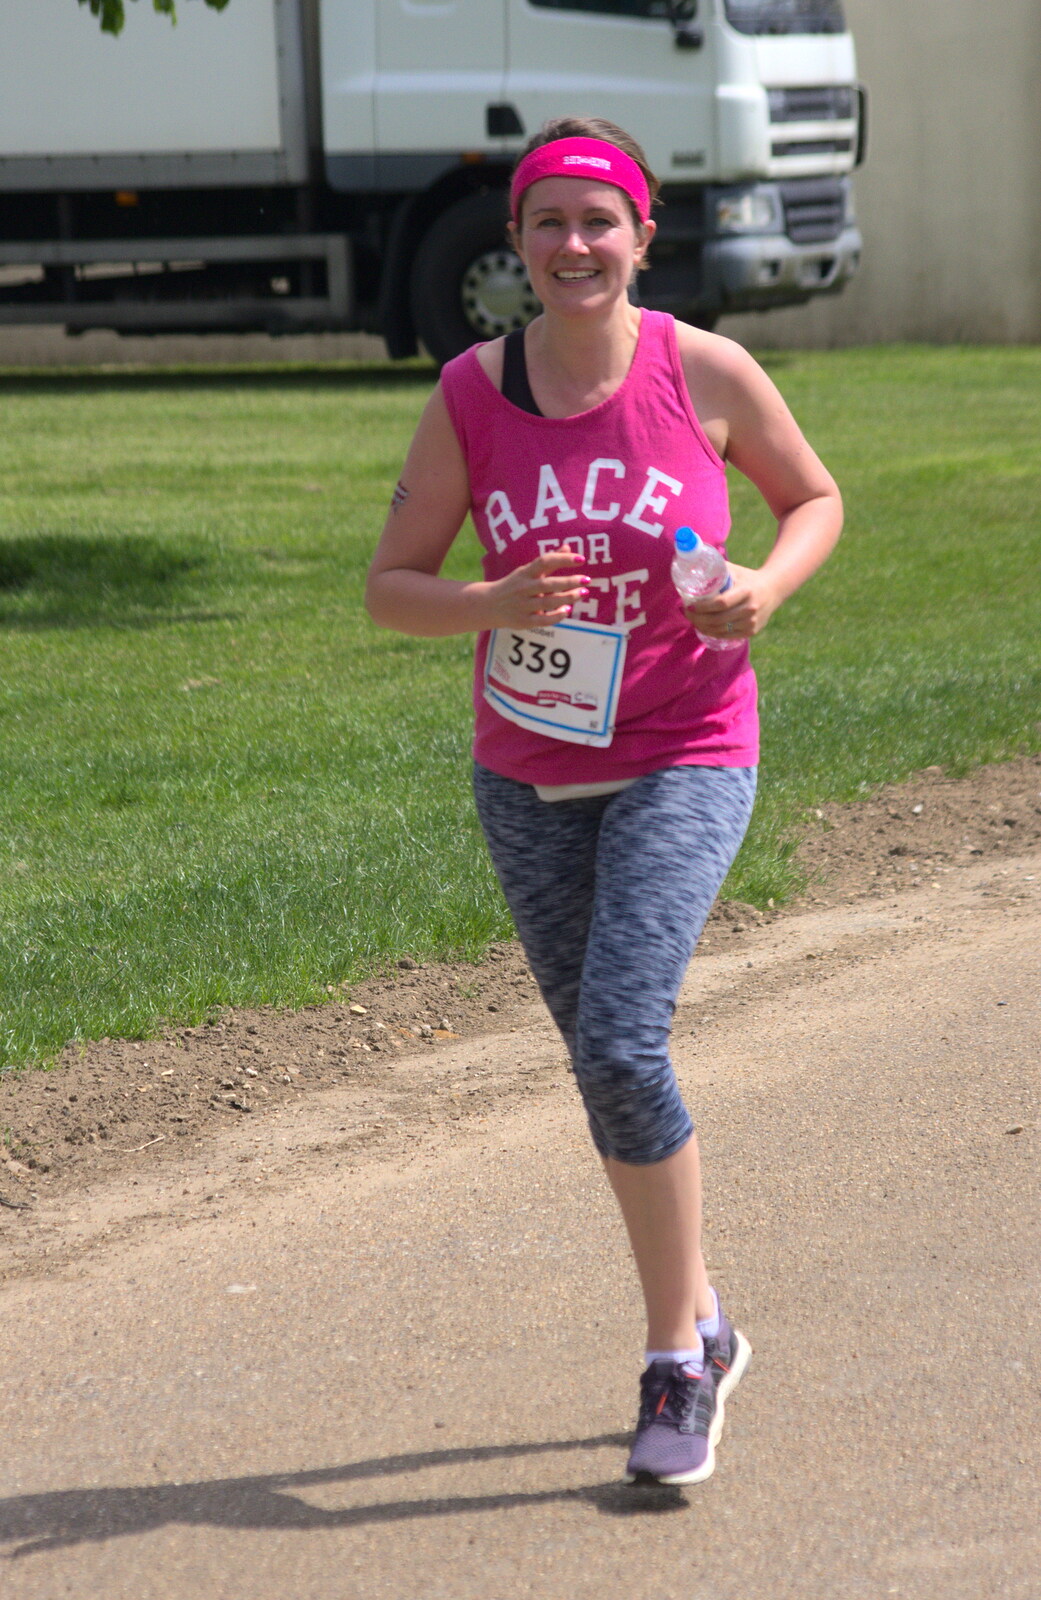 Isobel at 7k from Isobel's Race for Life, Costessey, Norwich - 15th May 2016